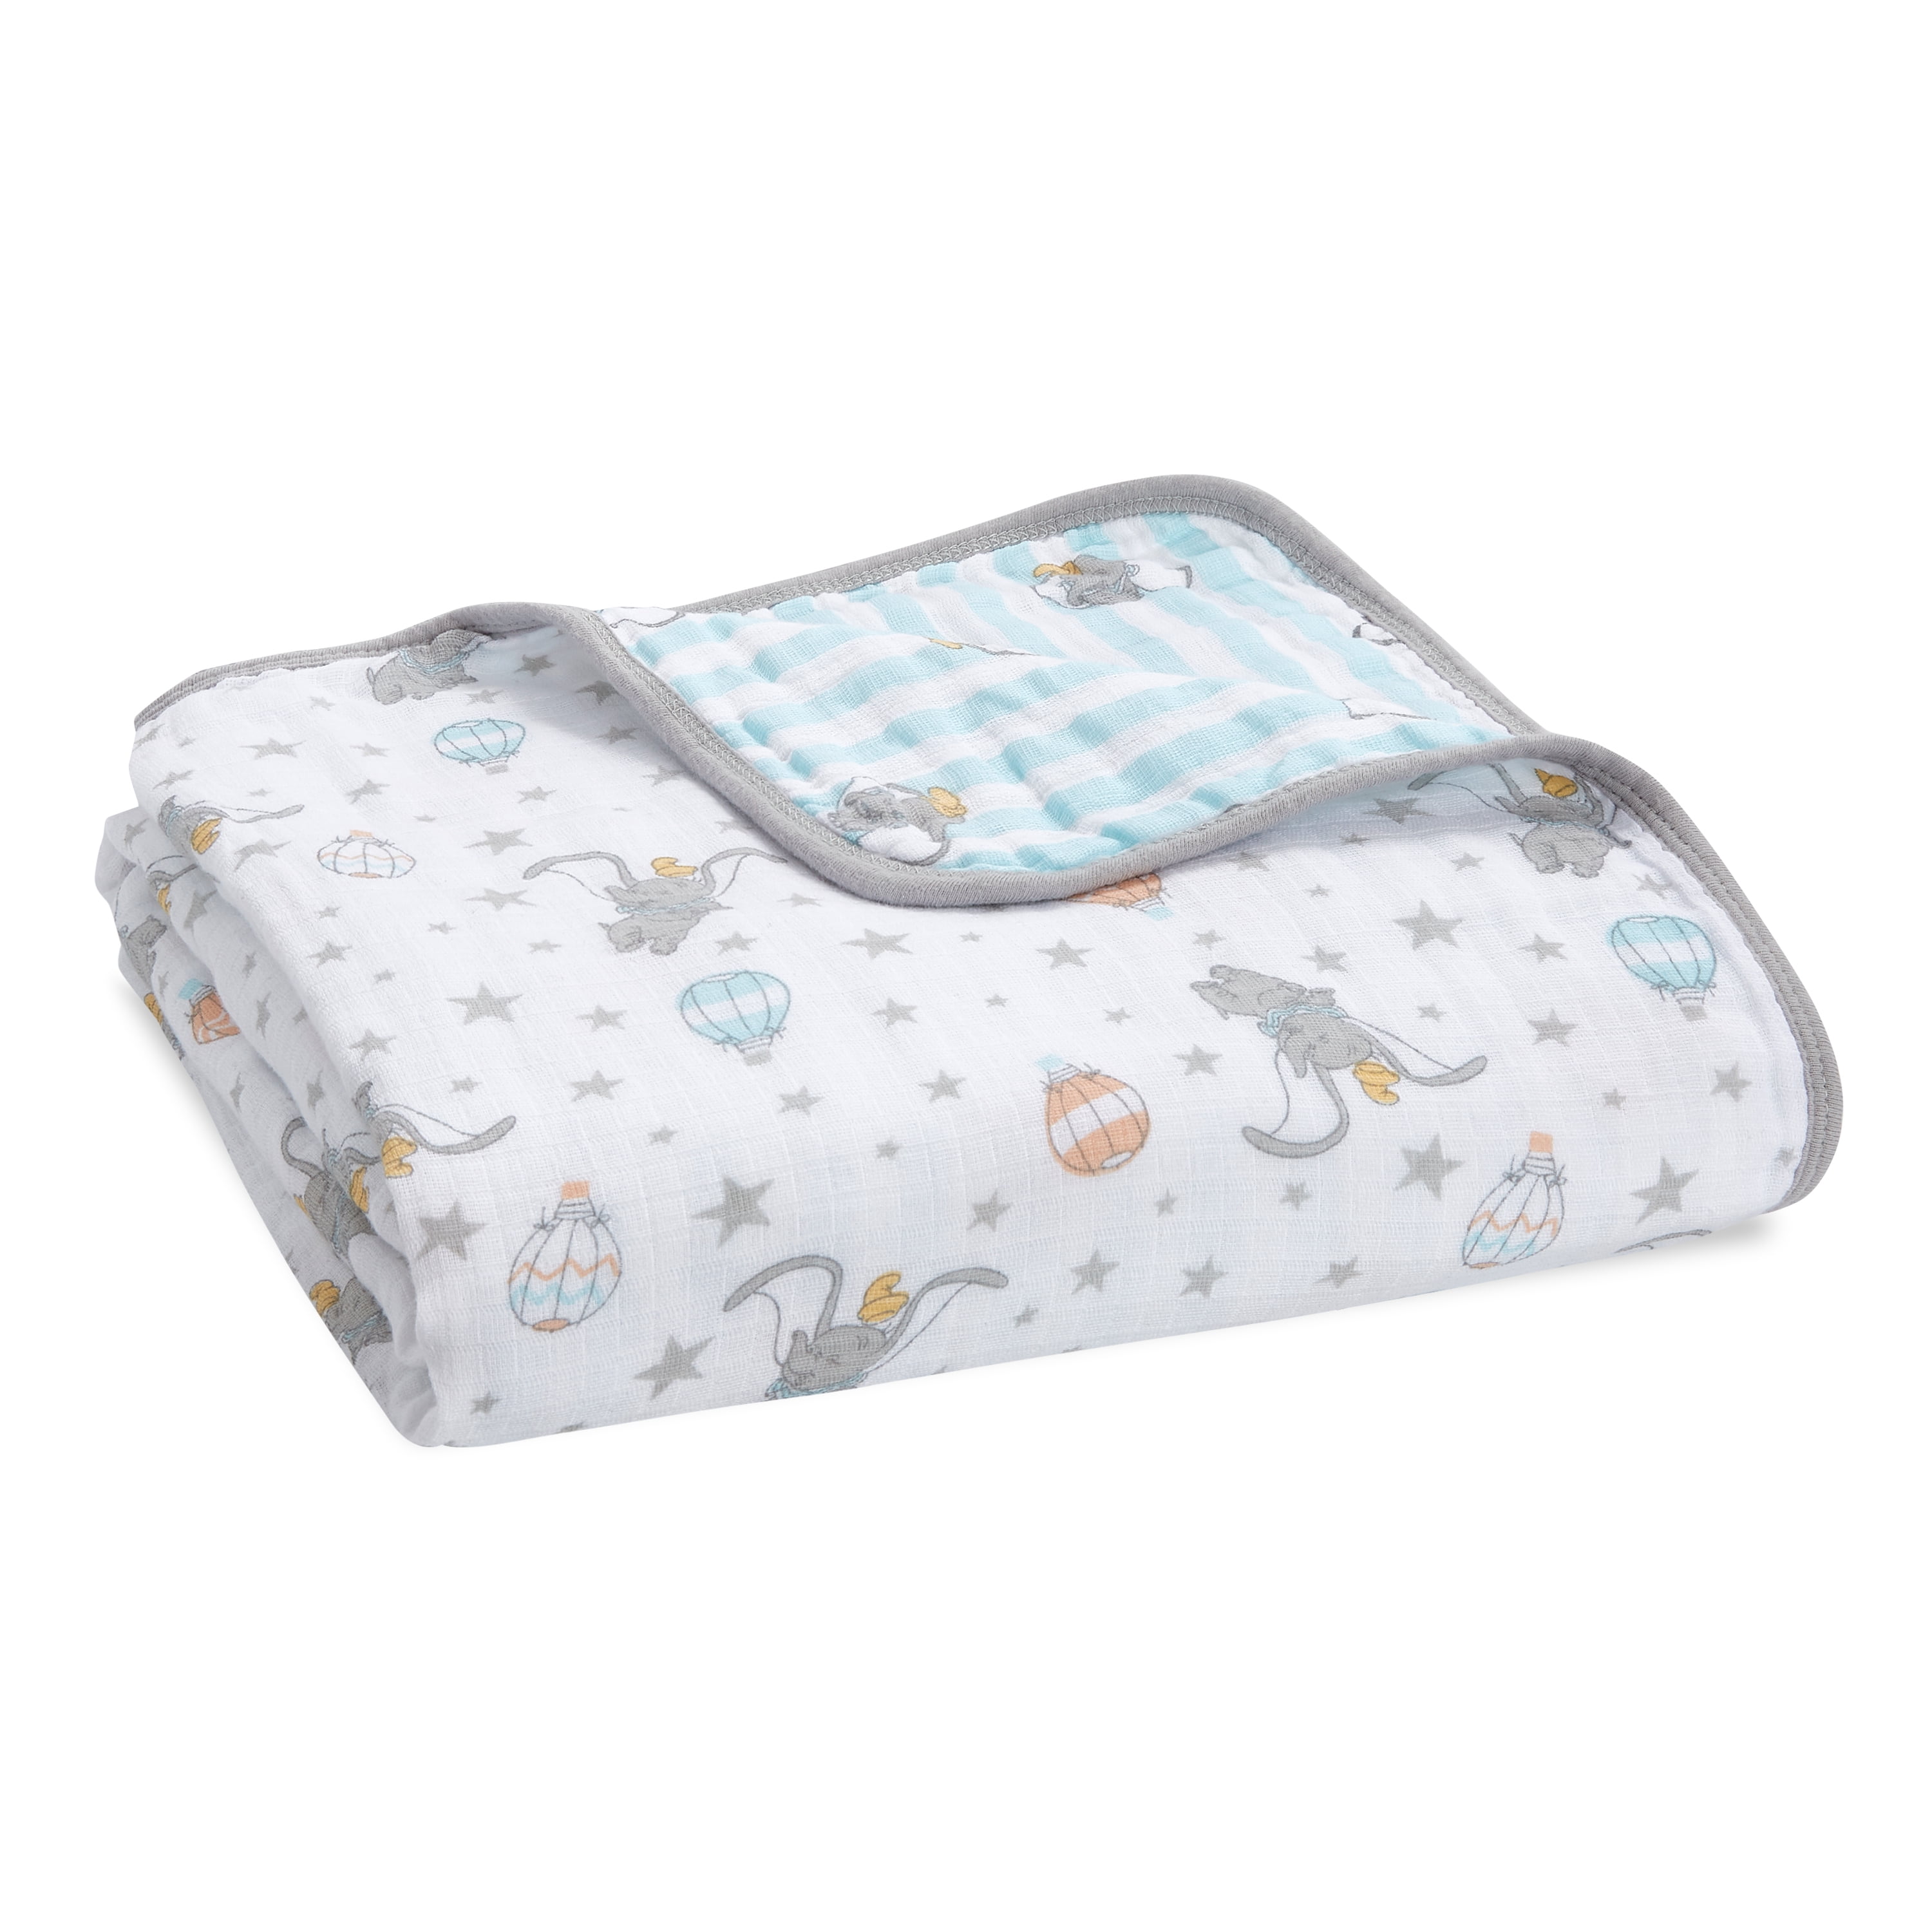 DUMBO NEW HEIGHTS 5 PACK Baby BN Anais ESSENTIALS MUSLIN SQUARES Aden 